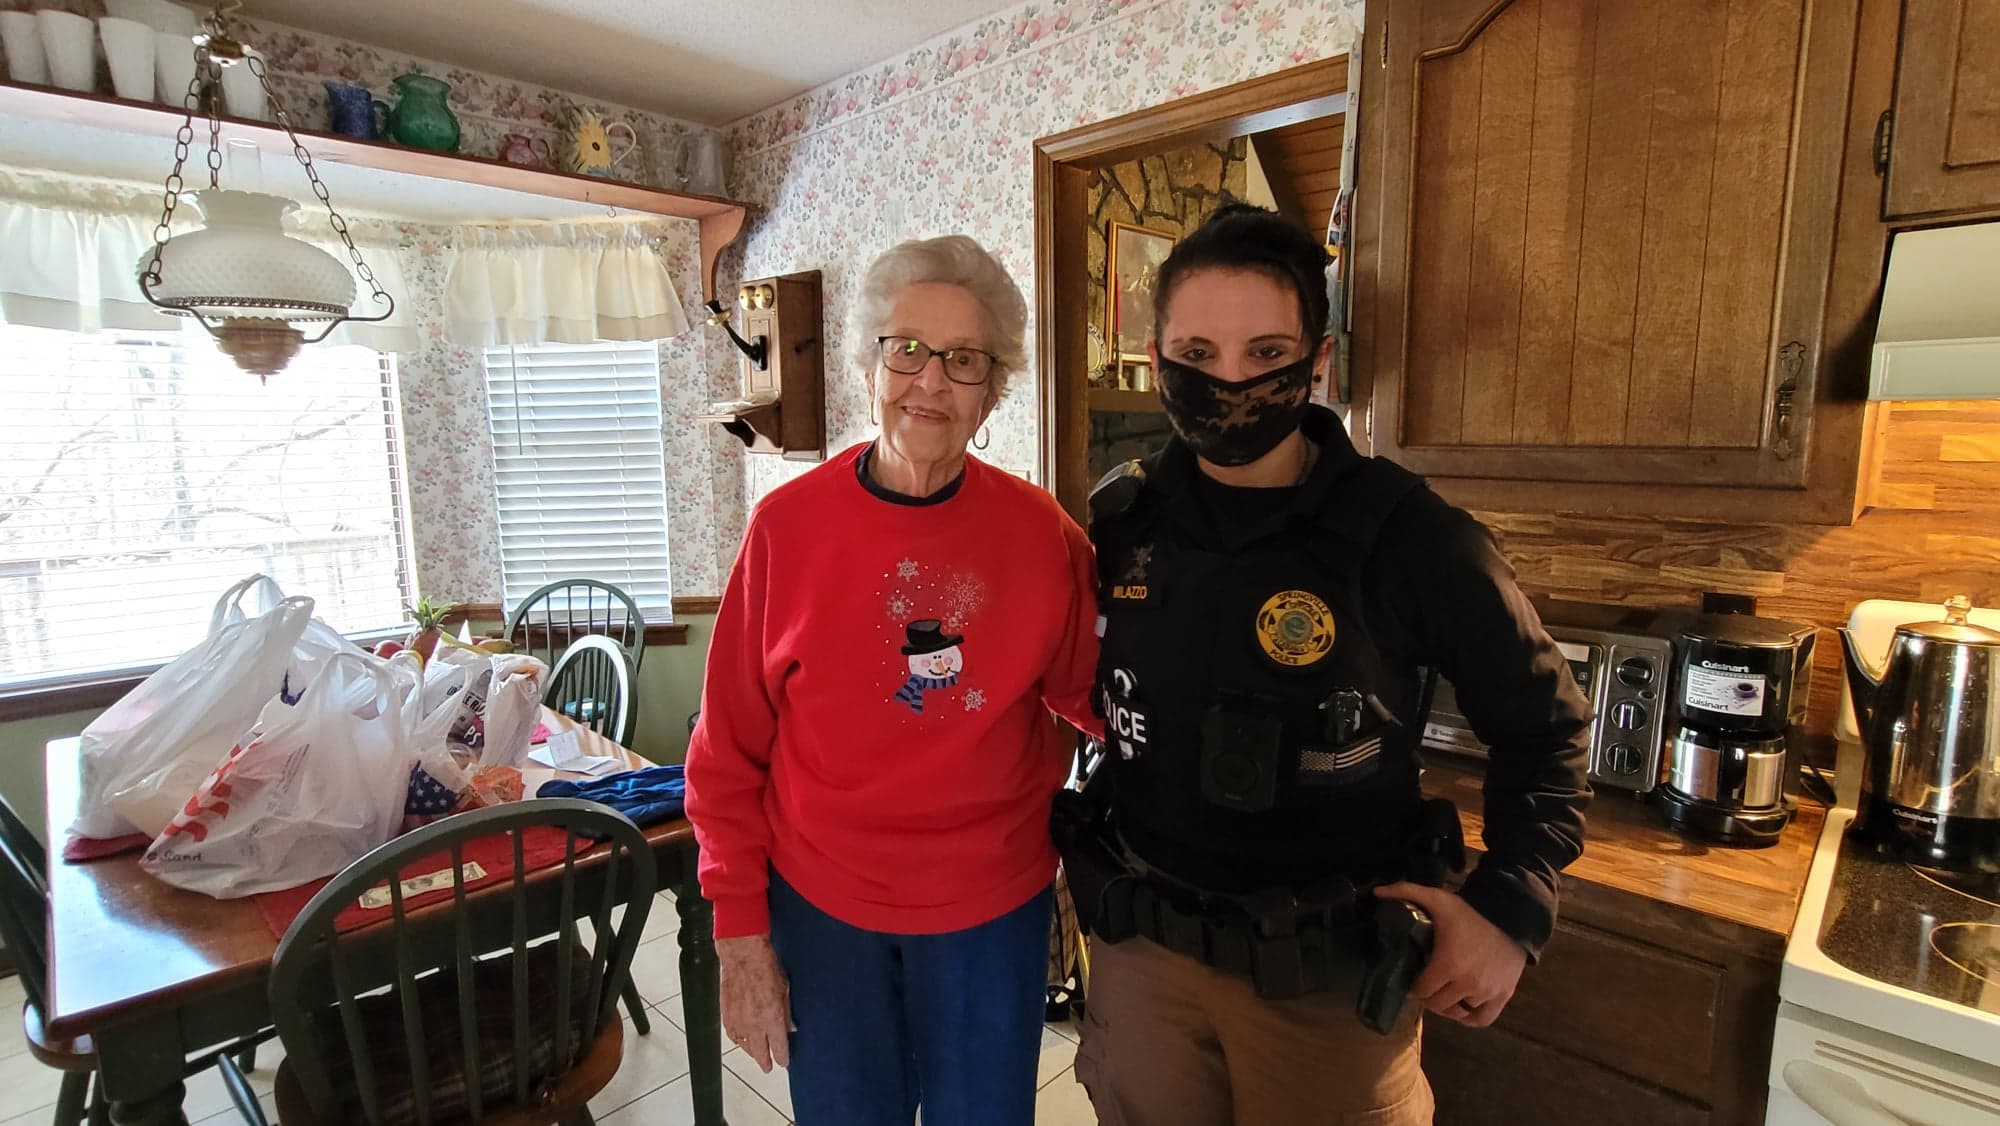 Springville PD and Senior Center teaming up to deliver groceries to elderly